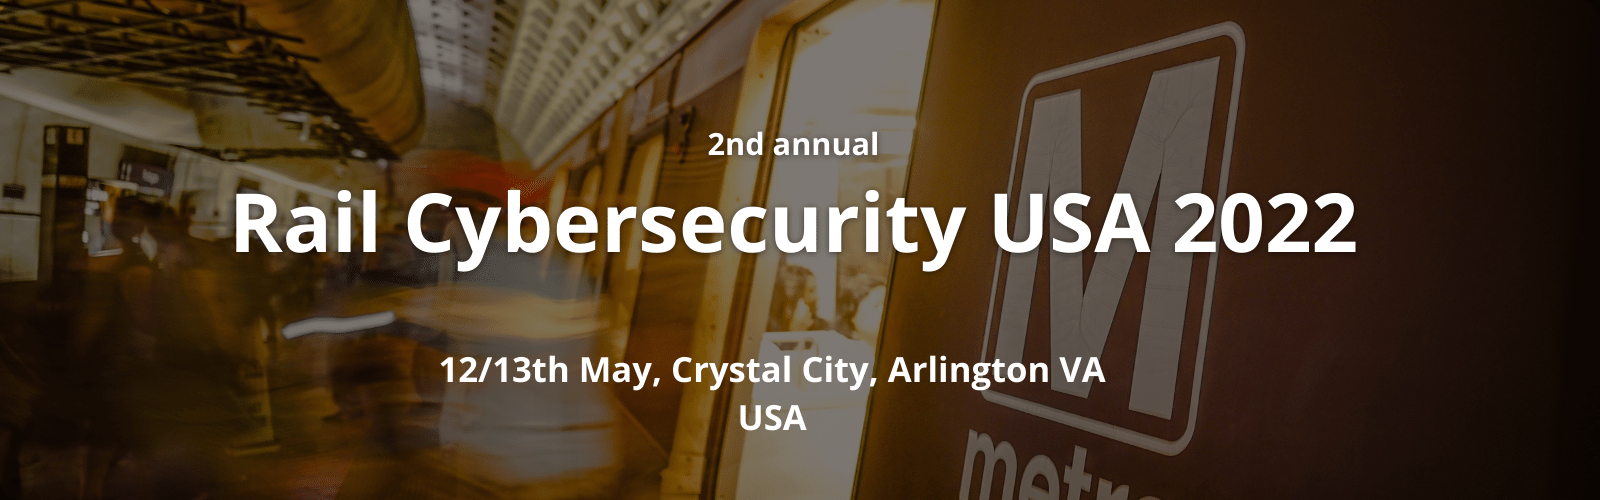 RAIL CYBER SECURITY USA CONFERENCE